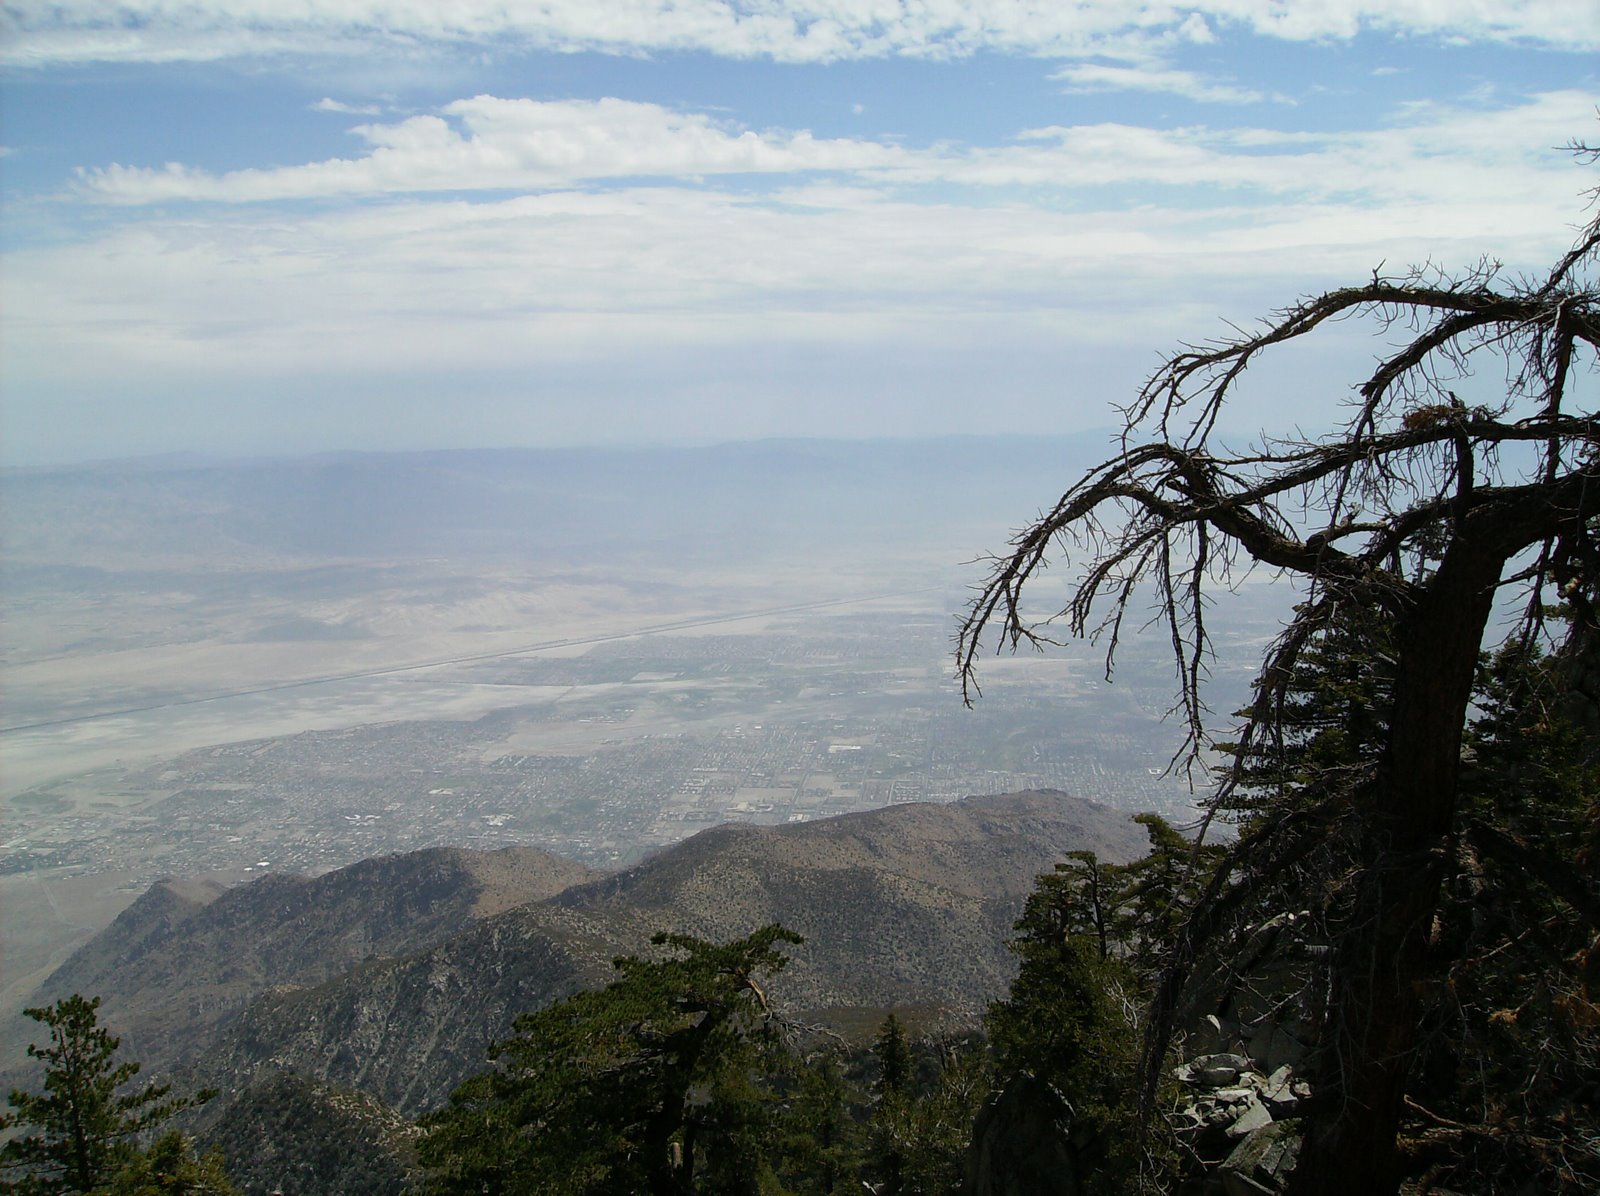 View of Palm Springs from the top of Mt. San Jacinto